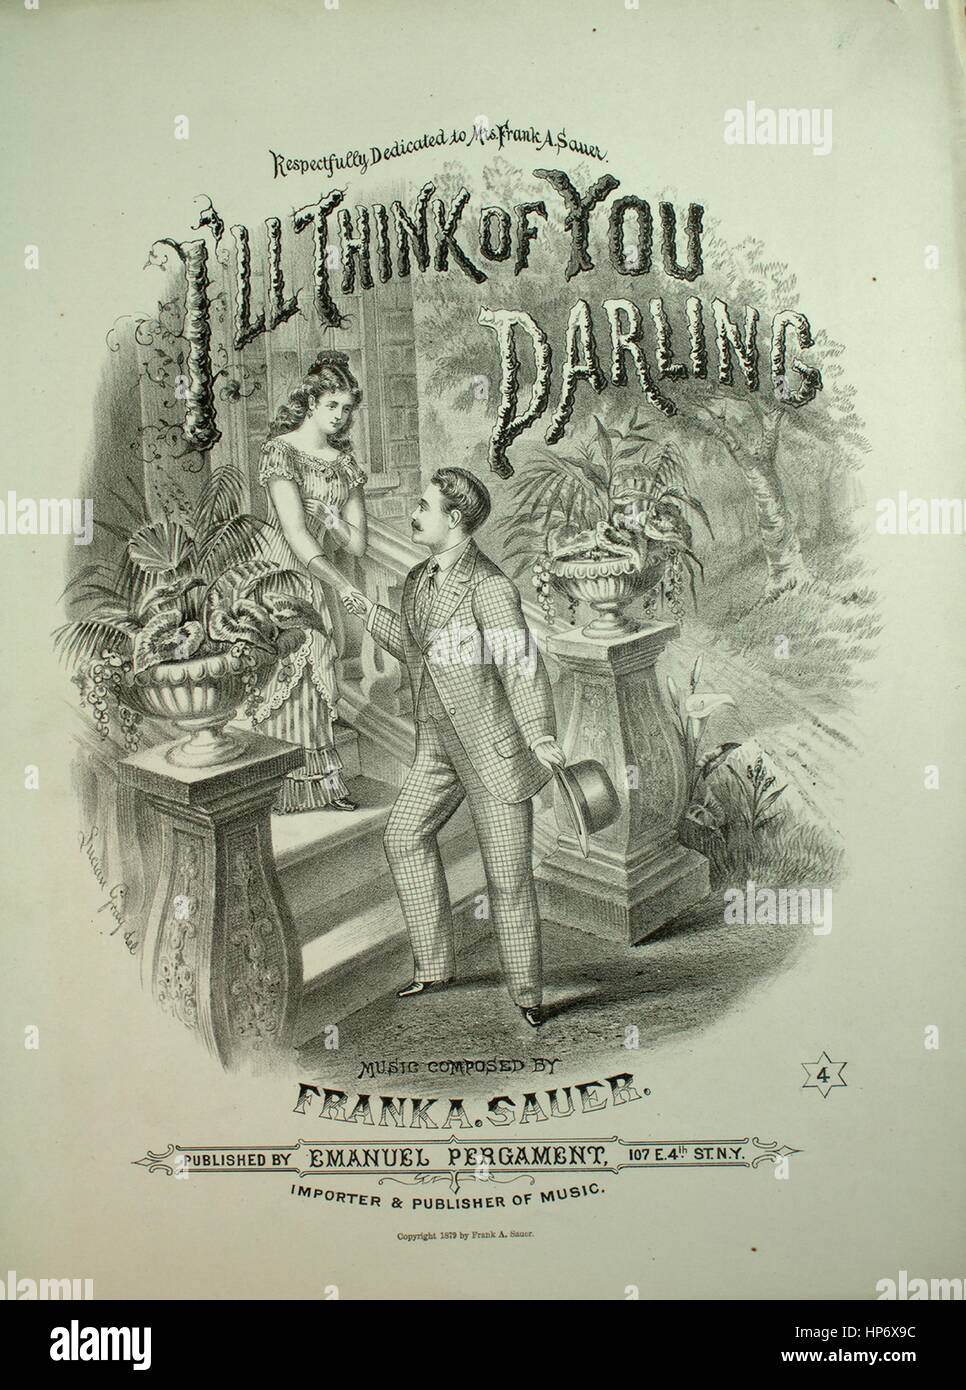 Sheet music cover image of the song 'I'll Think of You Darling', with original authorship notes reading 'Music Composed by Frank A Sauer', United States, 1879. The publisher is listed as 'Emanuel Pergament, 107 E. 4th St.', the form of composition is 'strophic with chorus', the instrumentation is 'piano and voice', the first line reads 'I'll think of your Darling when thou art away', and the illustration artist is listed as 'None'. Stock Photo